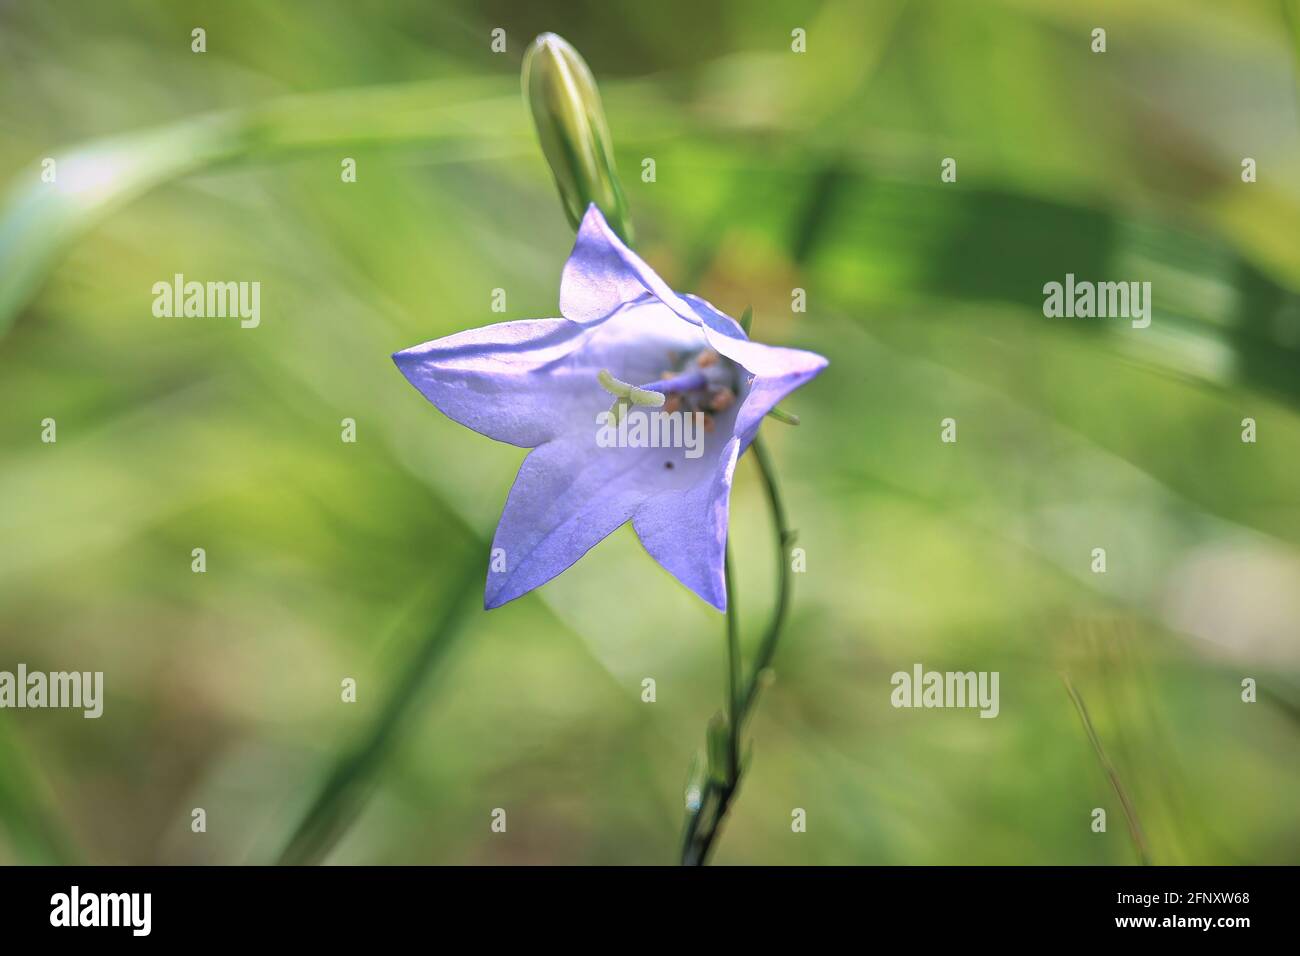 Macro of the star shaped flower on a common harebell Stock Photo